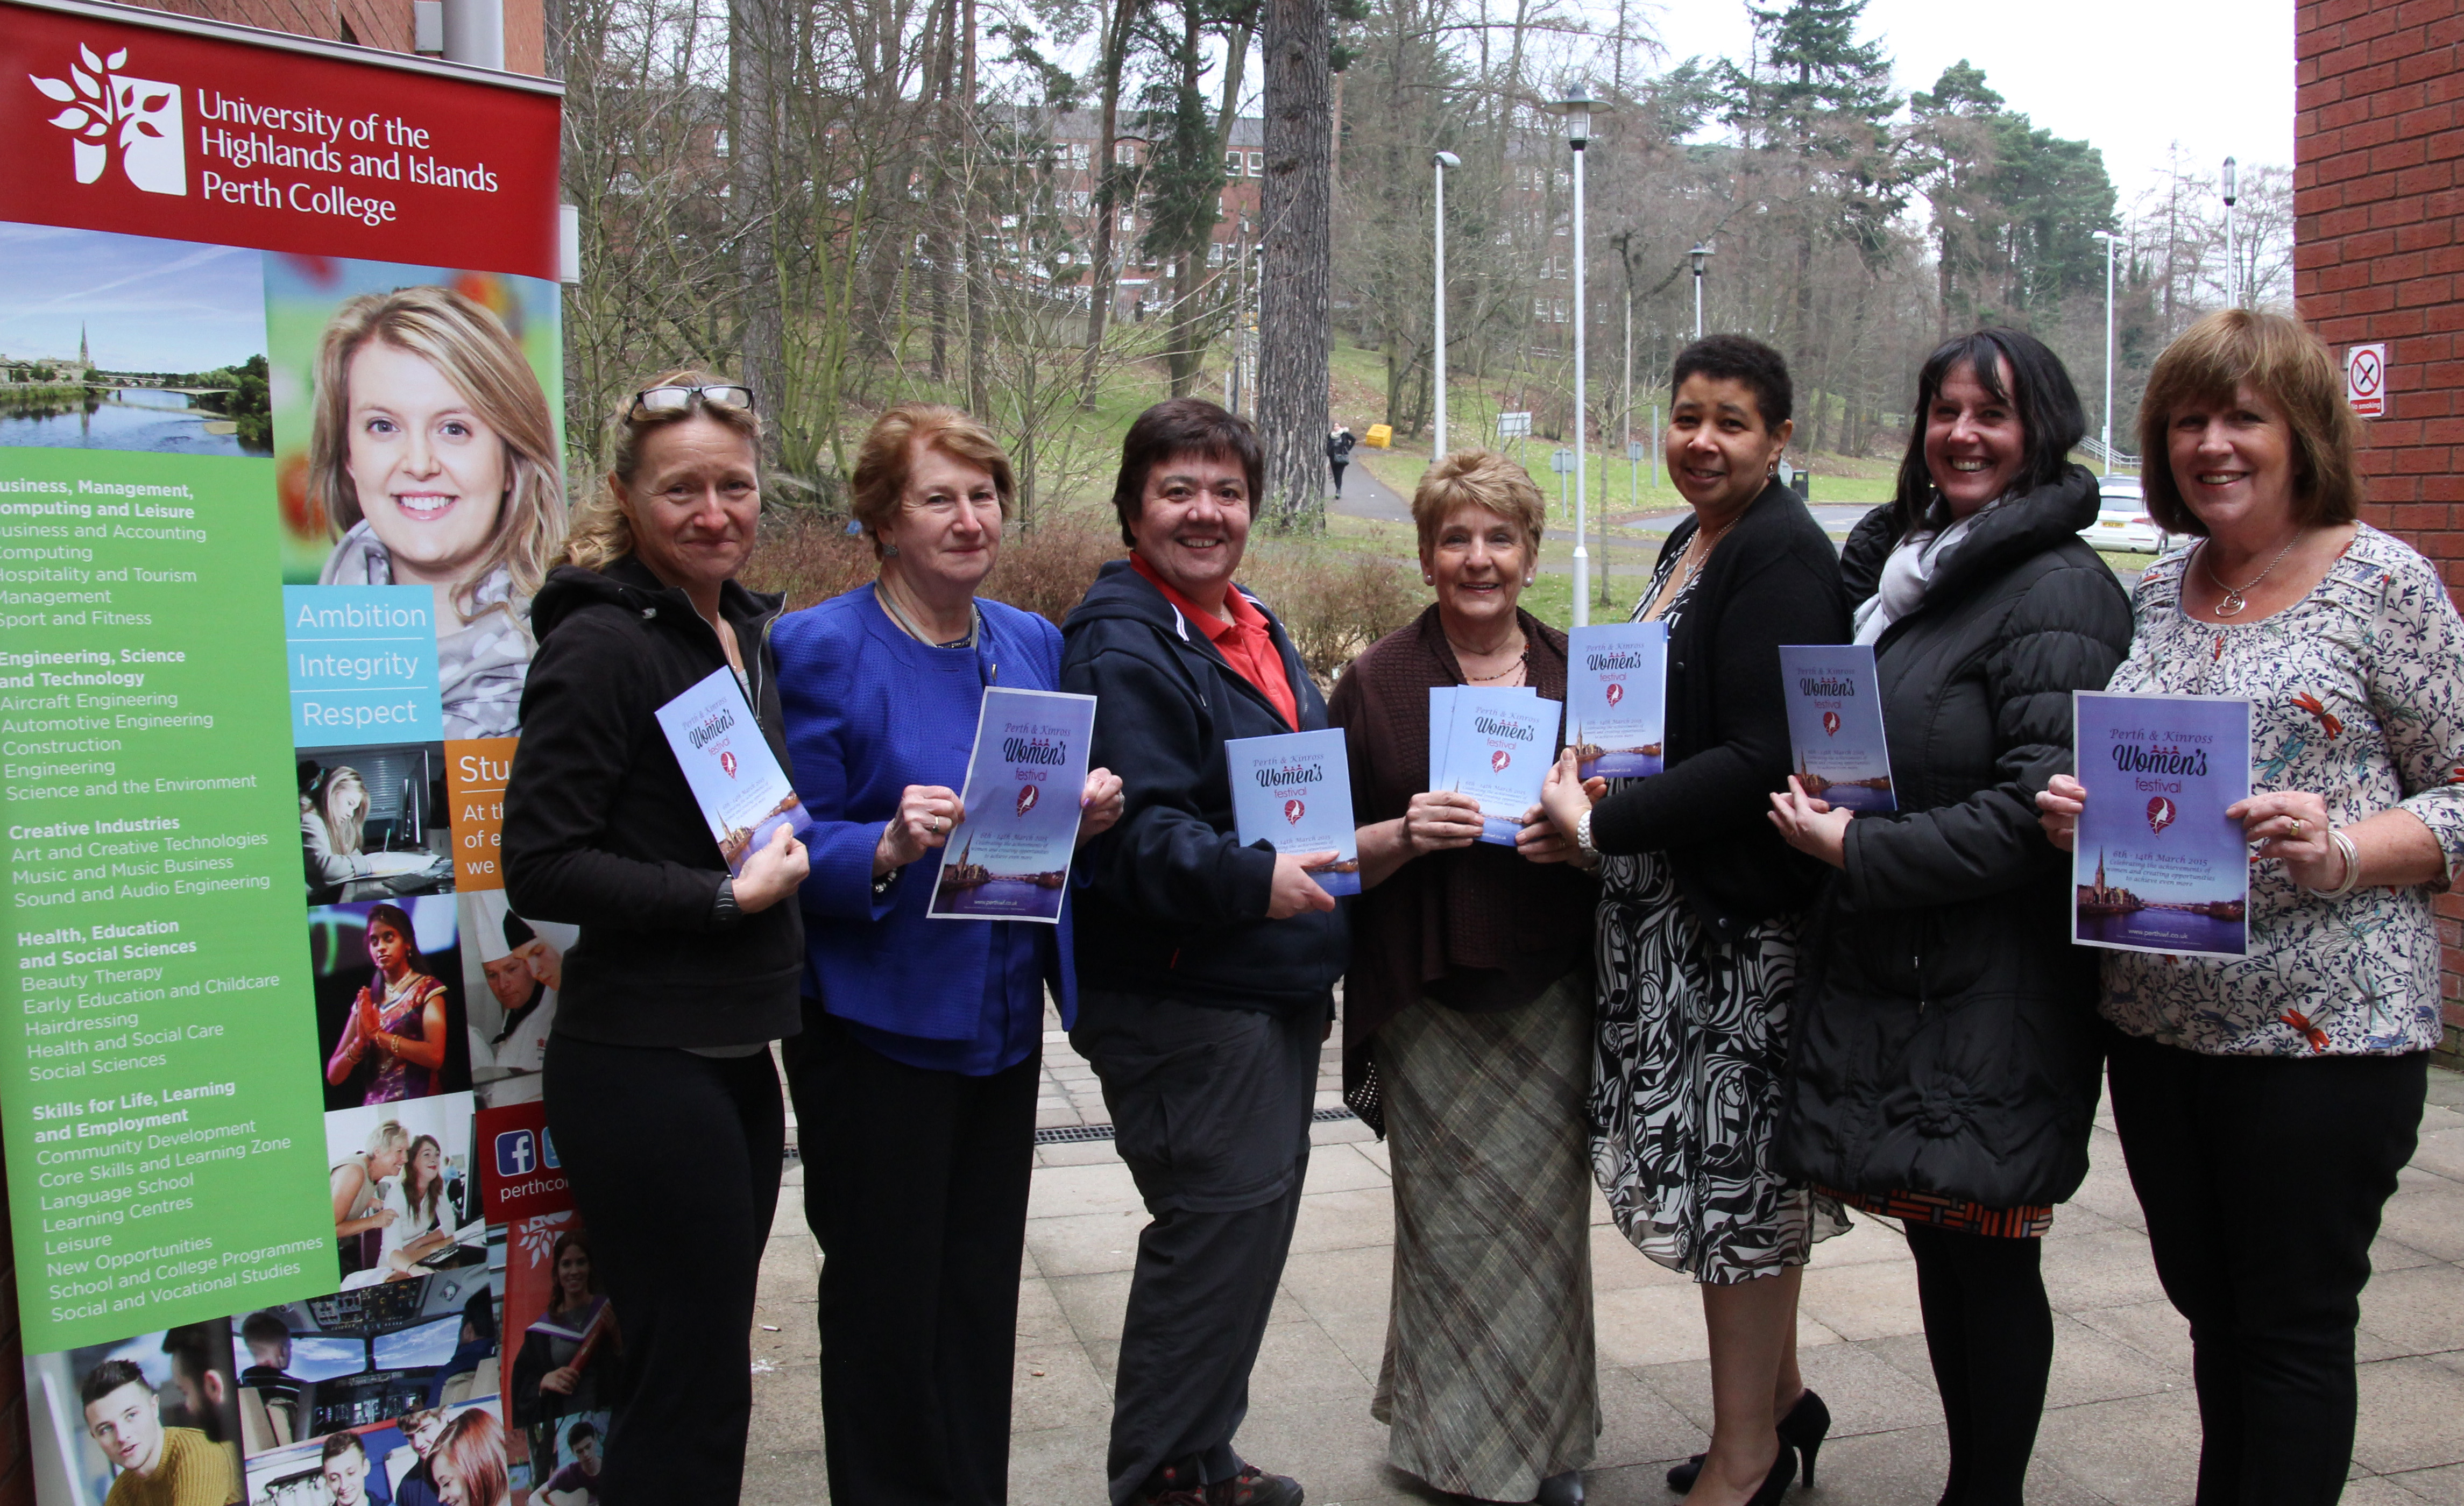 Perth and Kinross Women’s Festival 2015 Launch at Perth College UHI